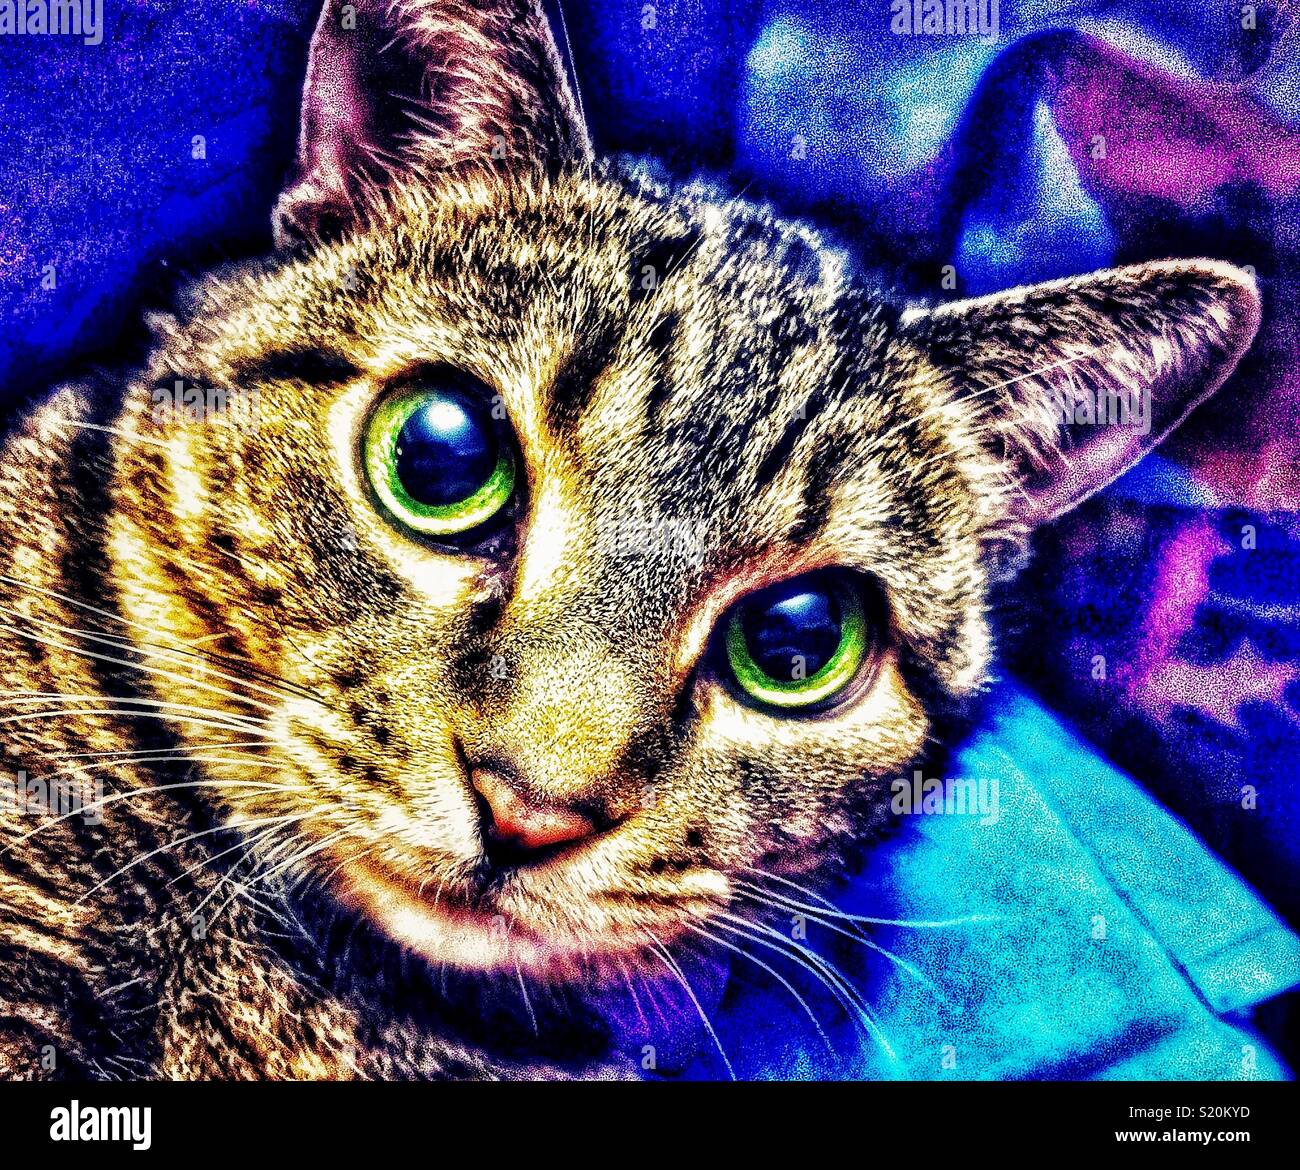 Face of Wide-eyed cat with bright green eyes Stock Photo